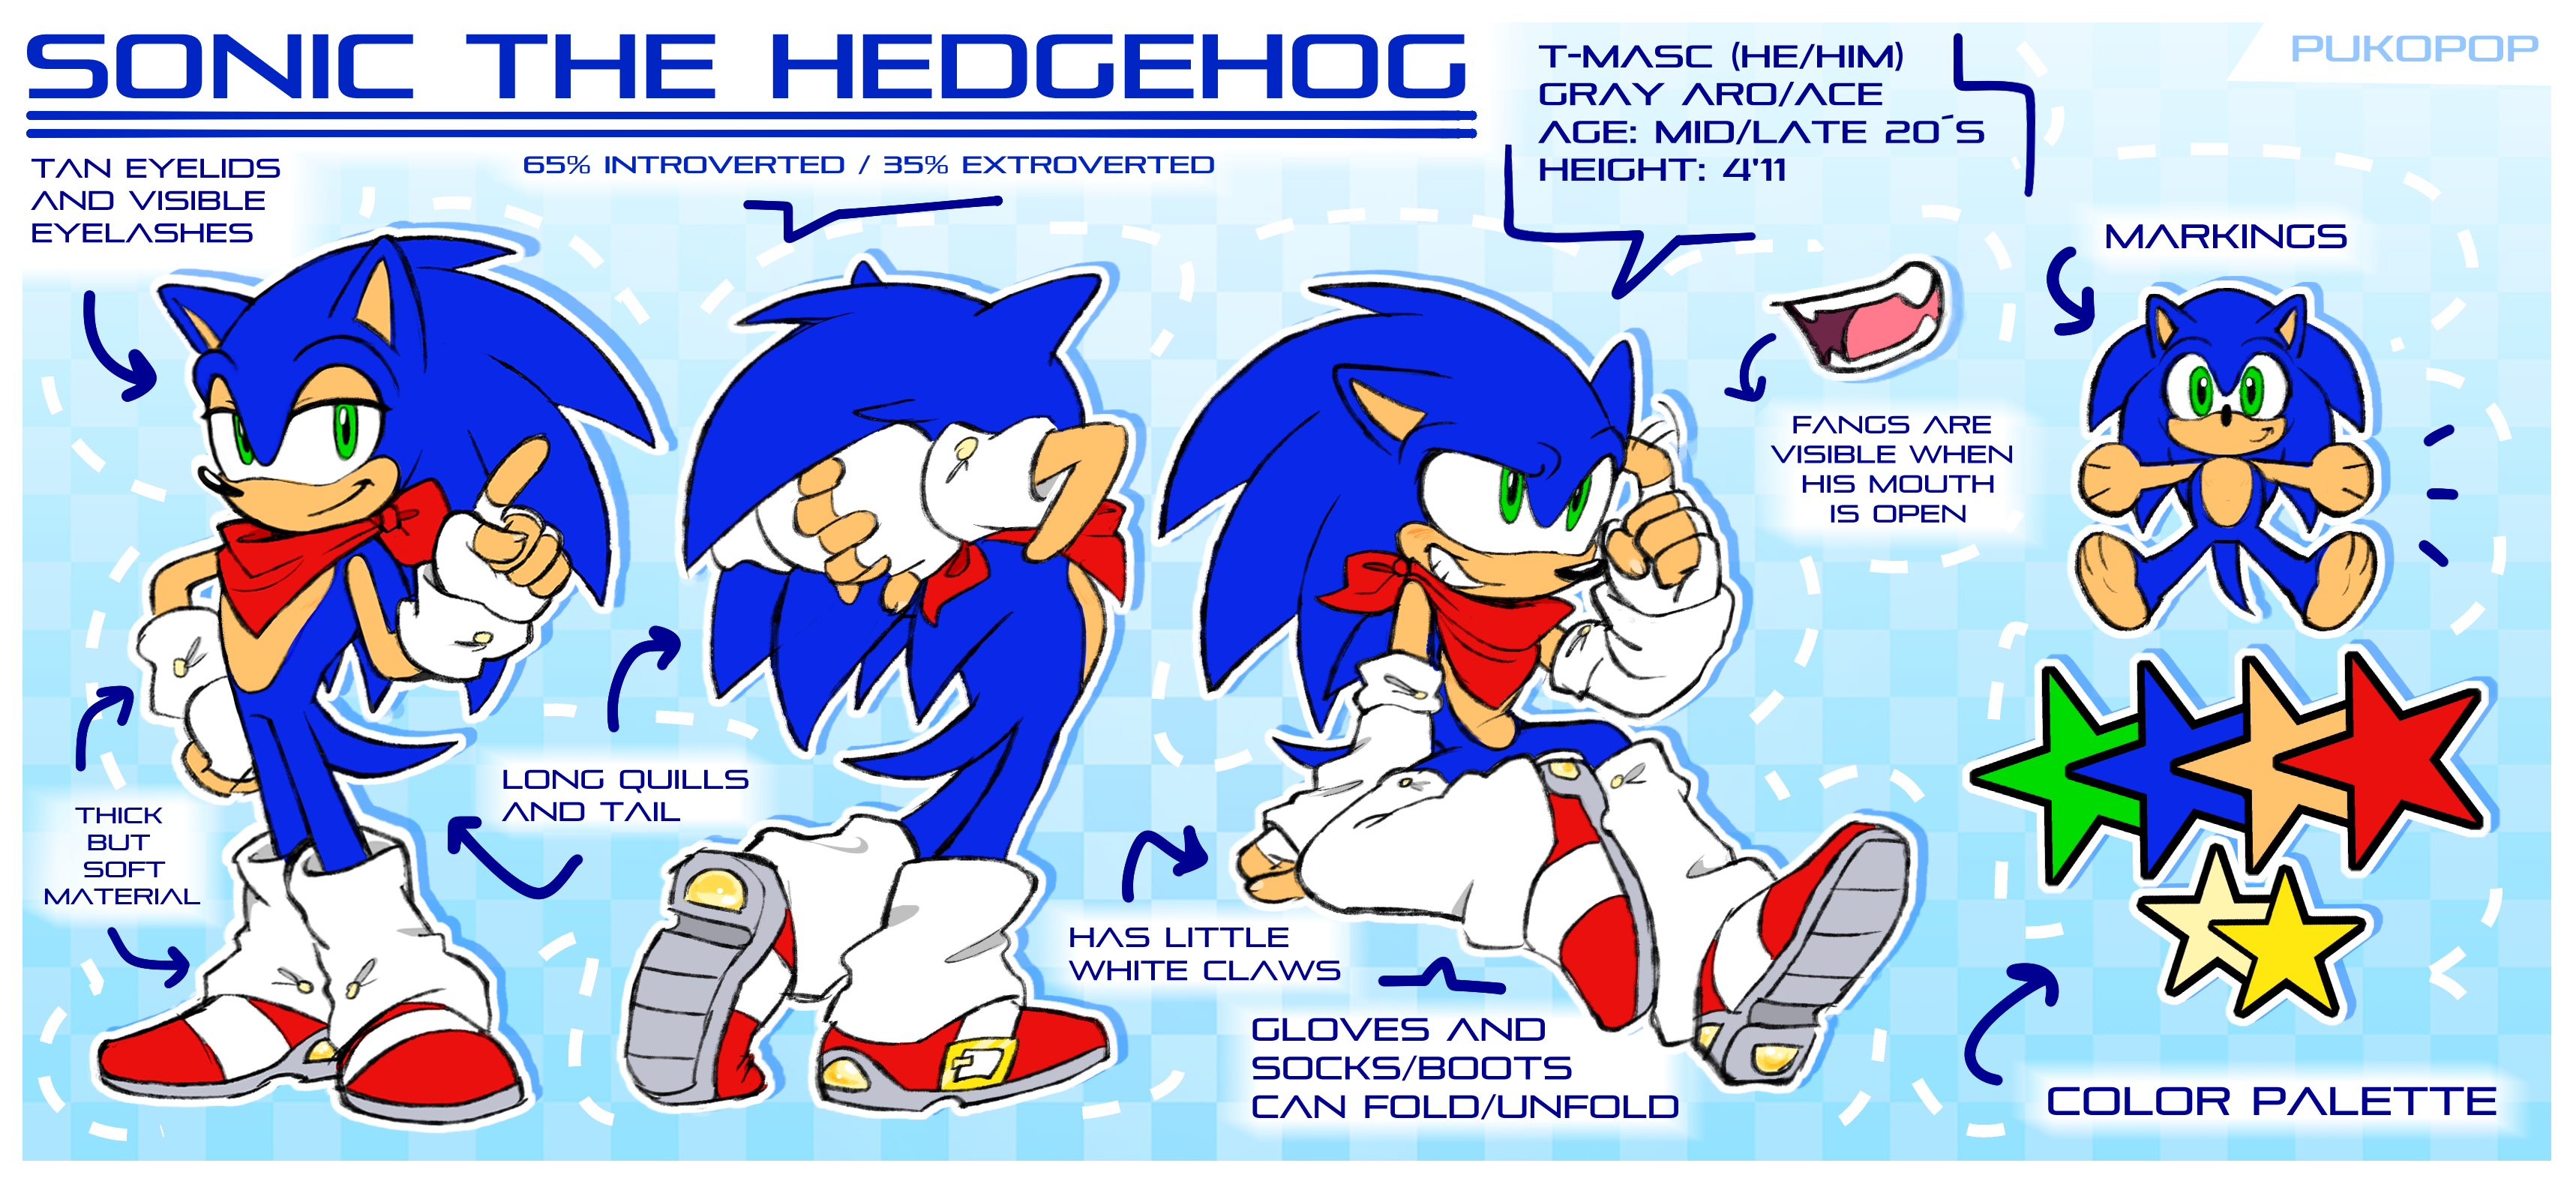 Ups and Downs - Zehntacles - Sonic the Hedgehog - All Media Types